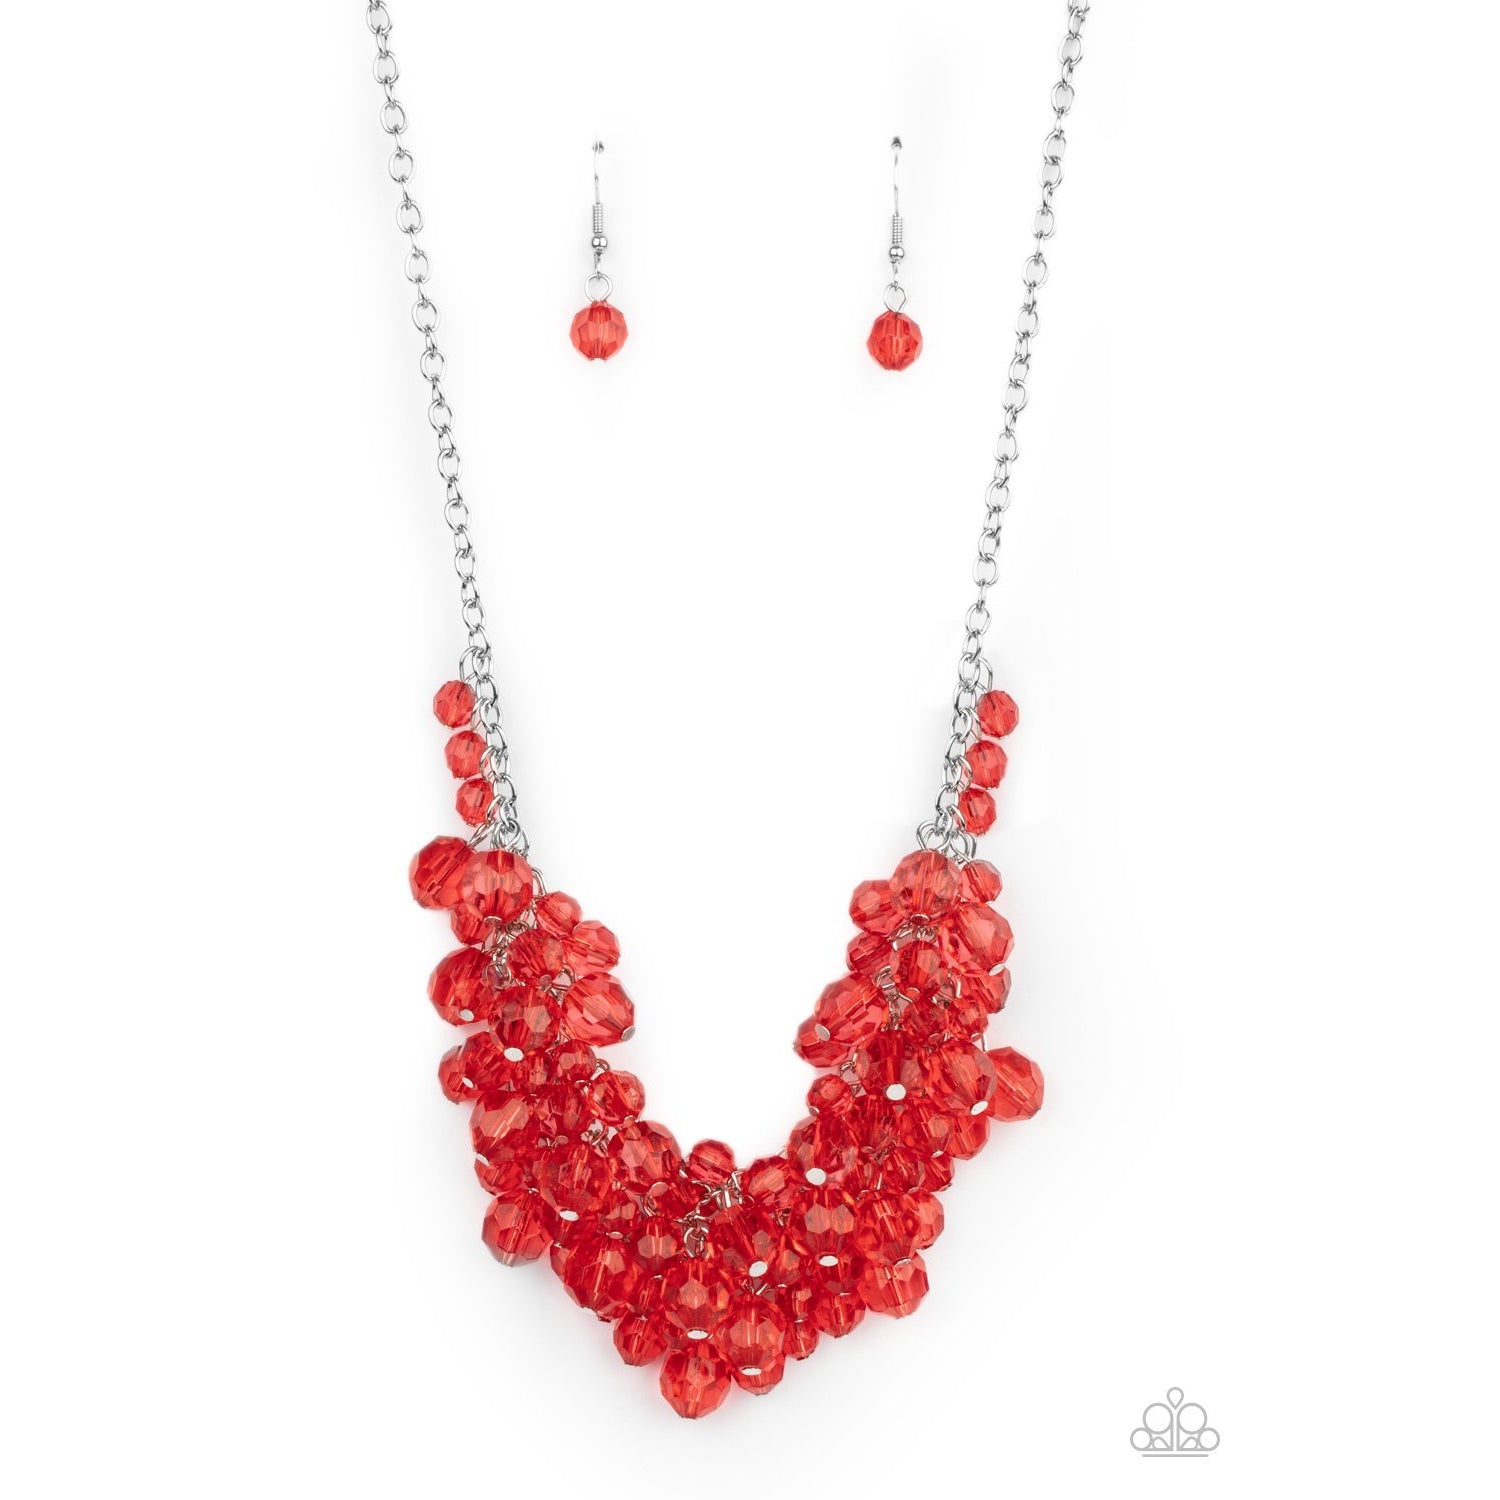 Let The Festivities Begin - Red Necklace - Paparazzi Accessories - GlaMarous Titi Jewels